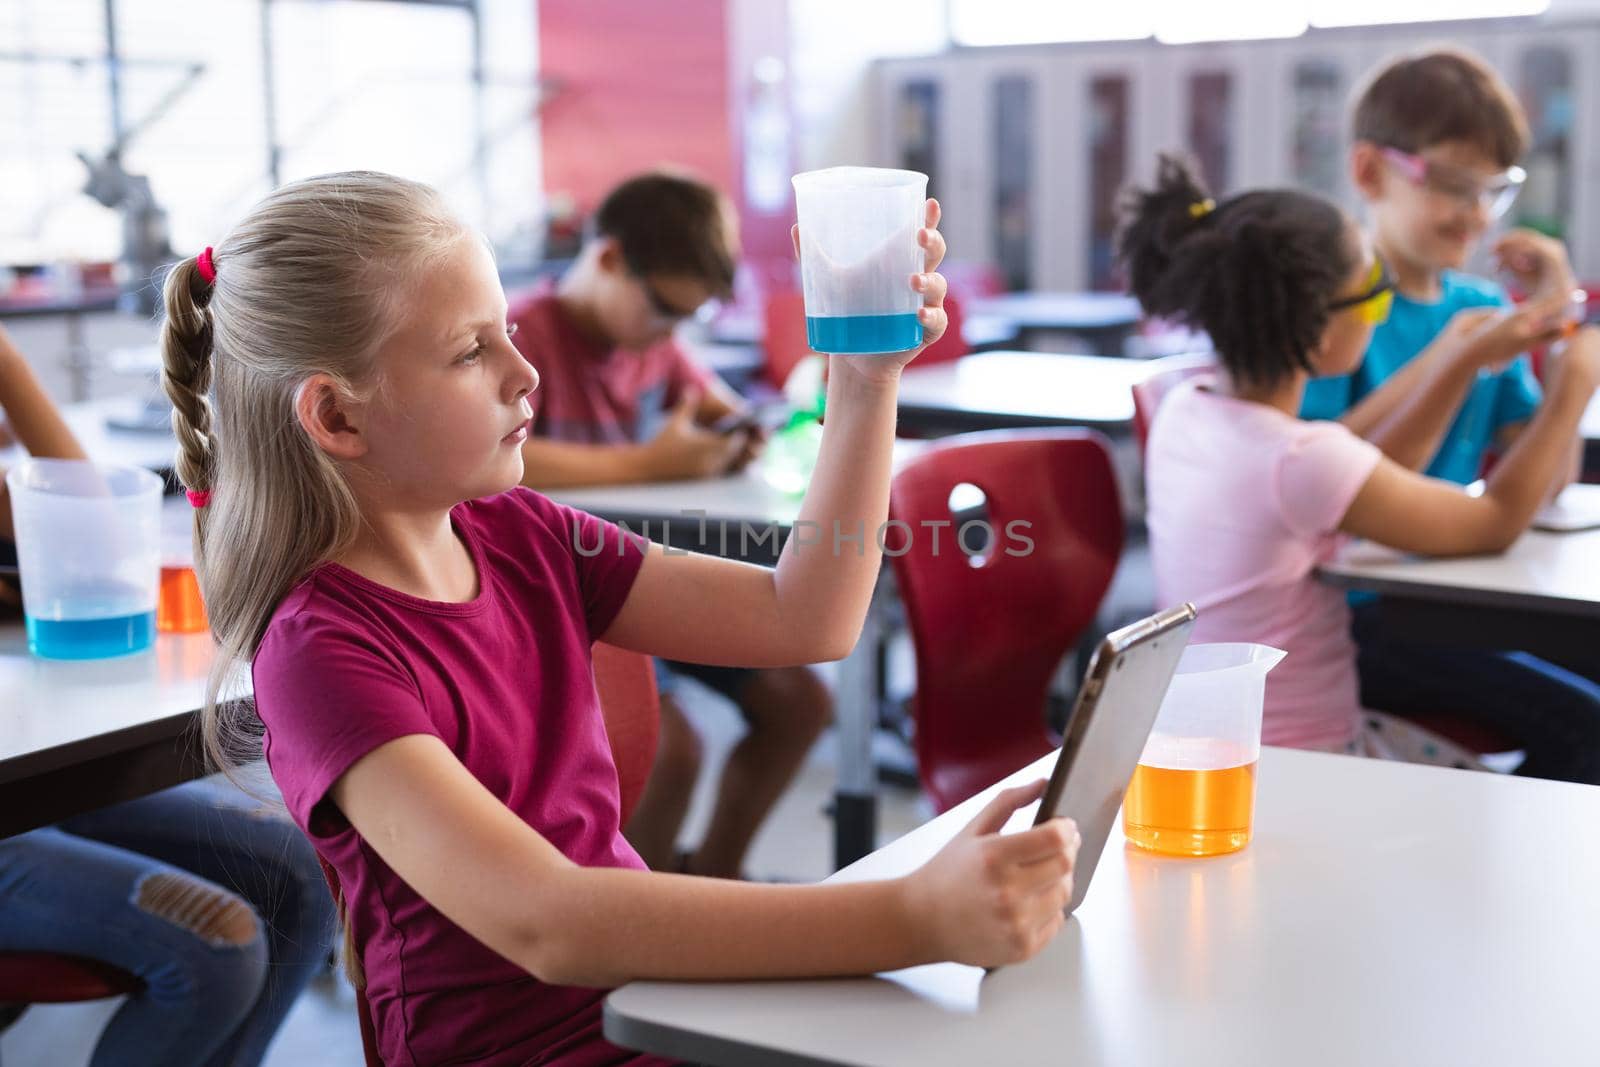 Caucasian boy holding a beaker and digital tablet in science class at laboratory by Wavebreakmedia